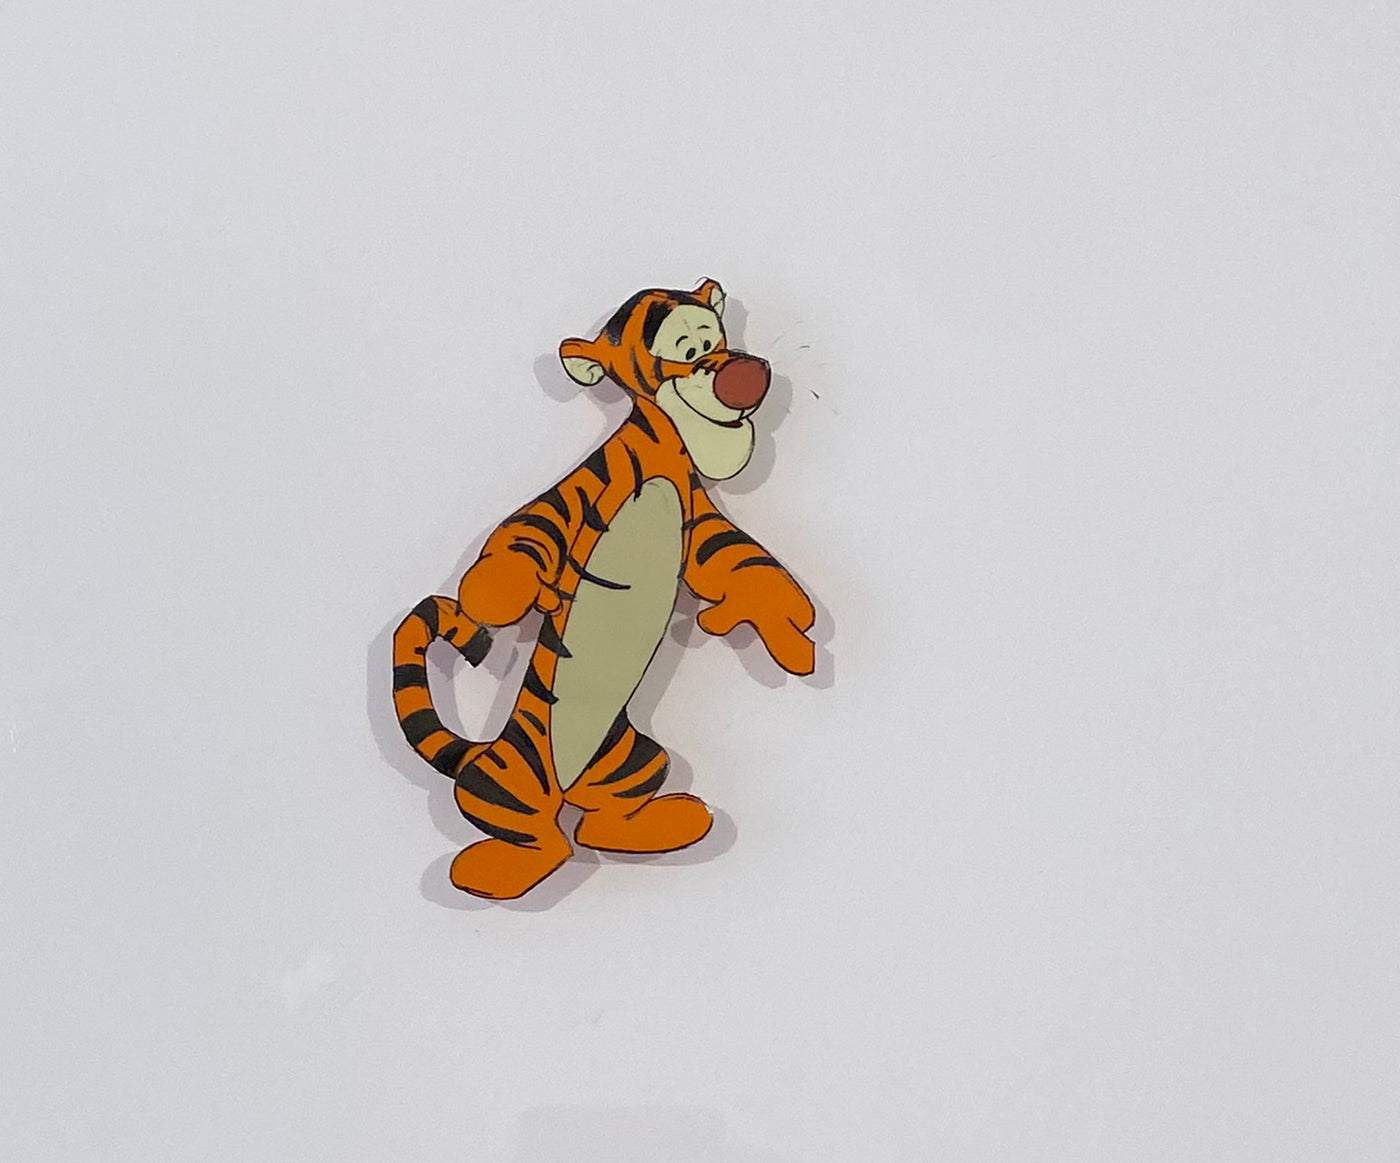 Original Walt Disney Production Cel from The Many Adventures of Winnie the Pooh featuring Tigger